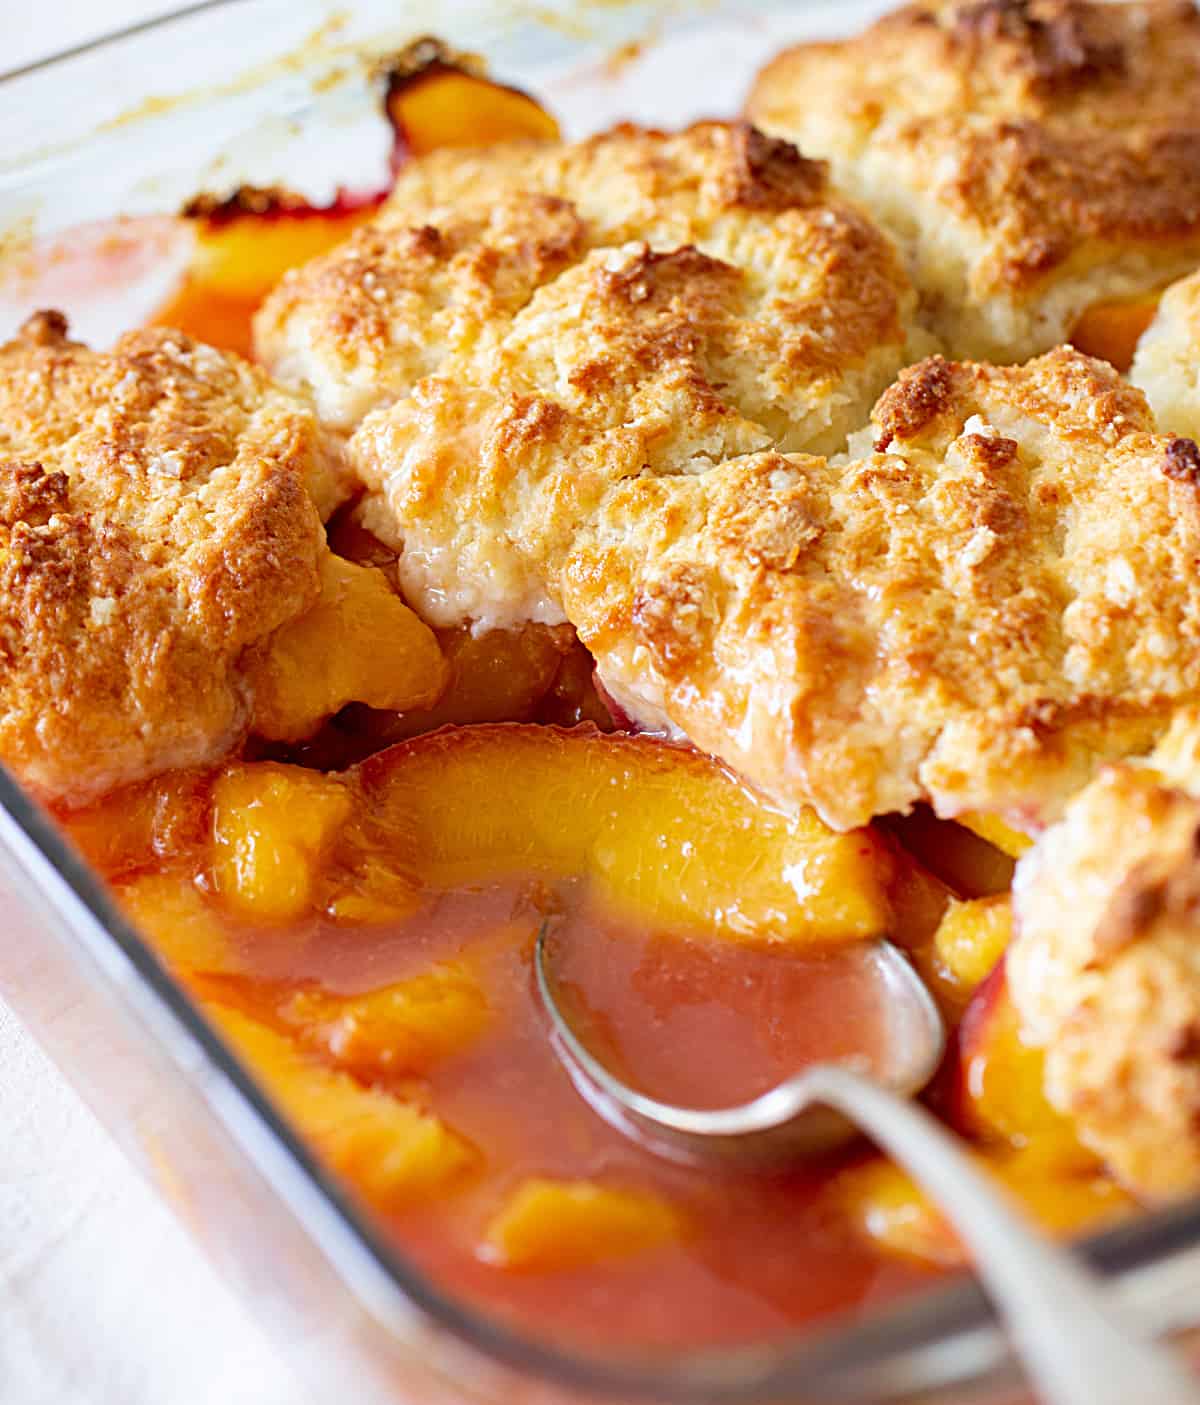 Peach Cobbler Recipe With Canned Peaches / Old Fashioned Peach Cobbler